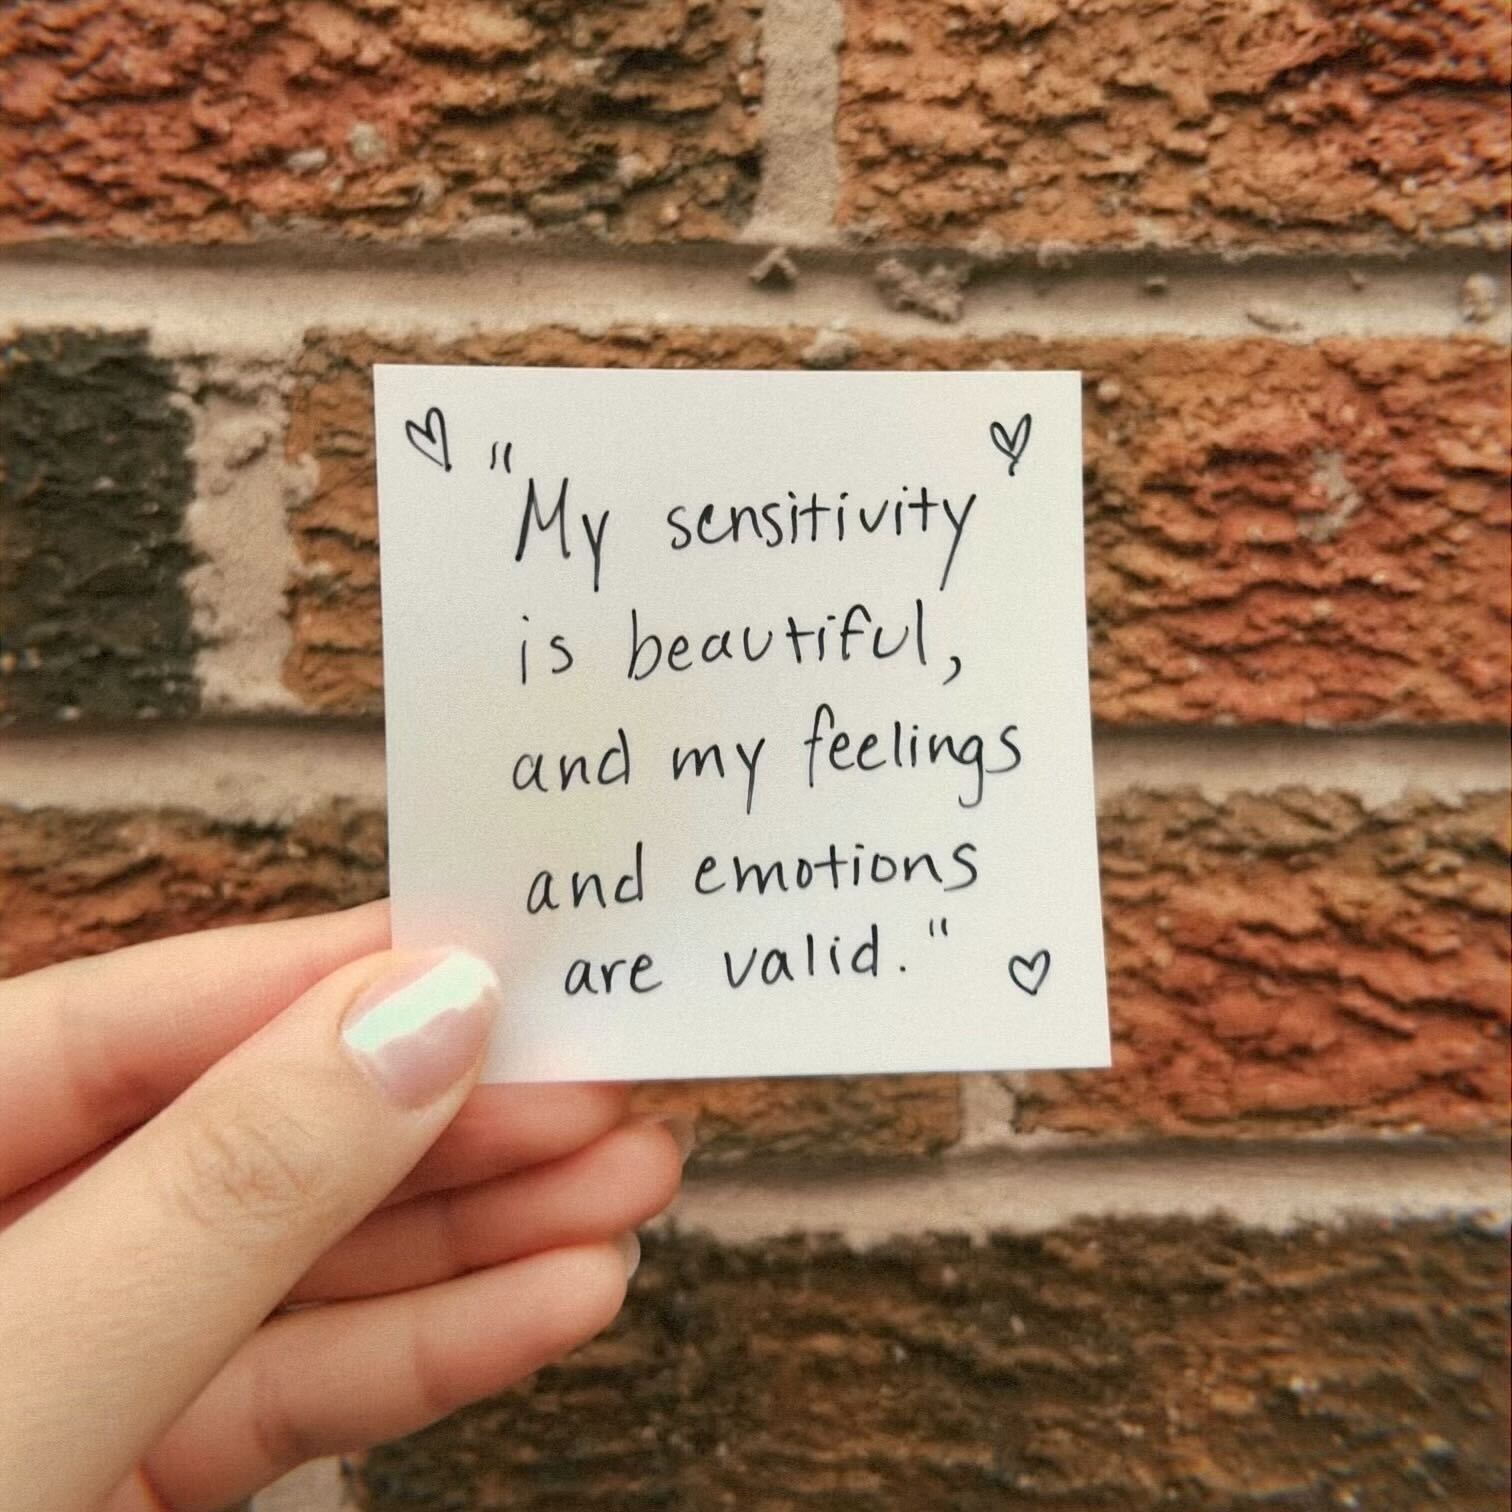 A sticky note held up in front of a brick wall, reading "My sensitivity is beautiful, and my feelings and emotions are valid".